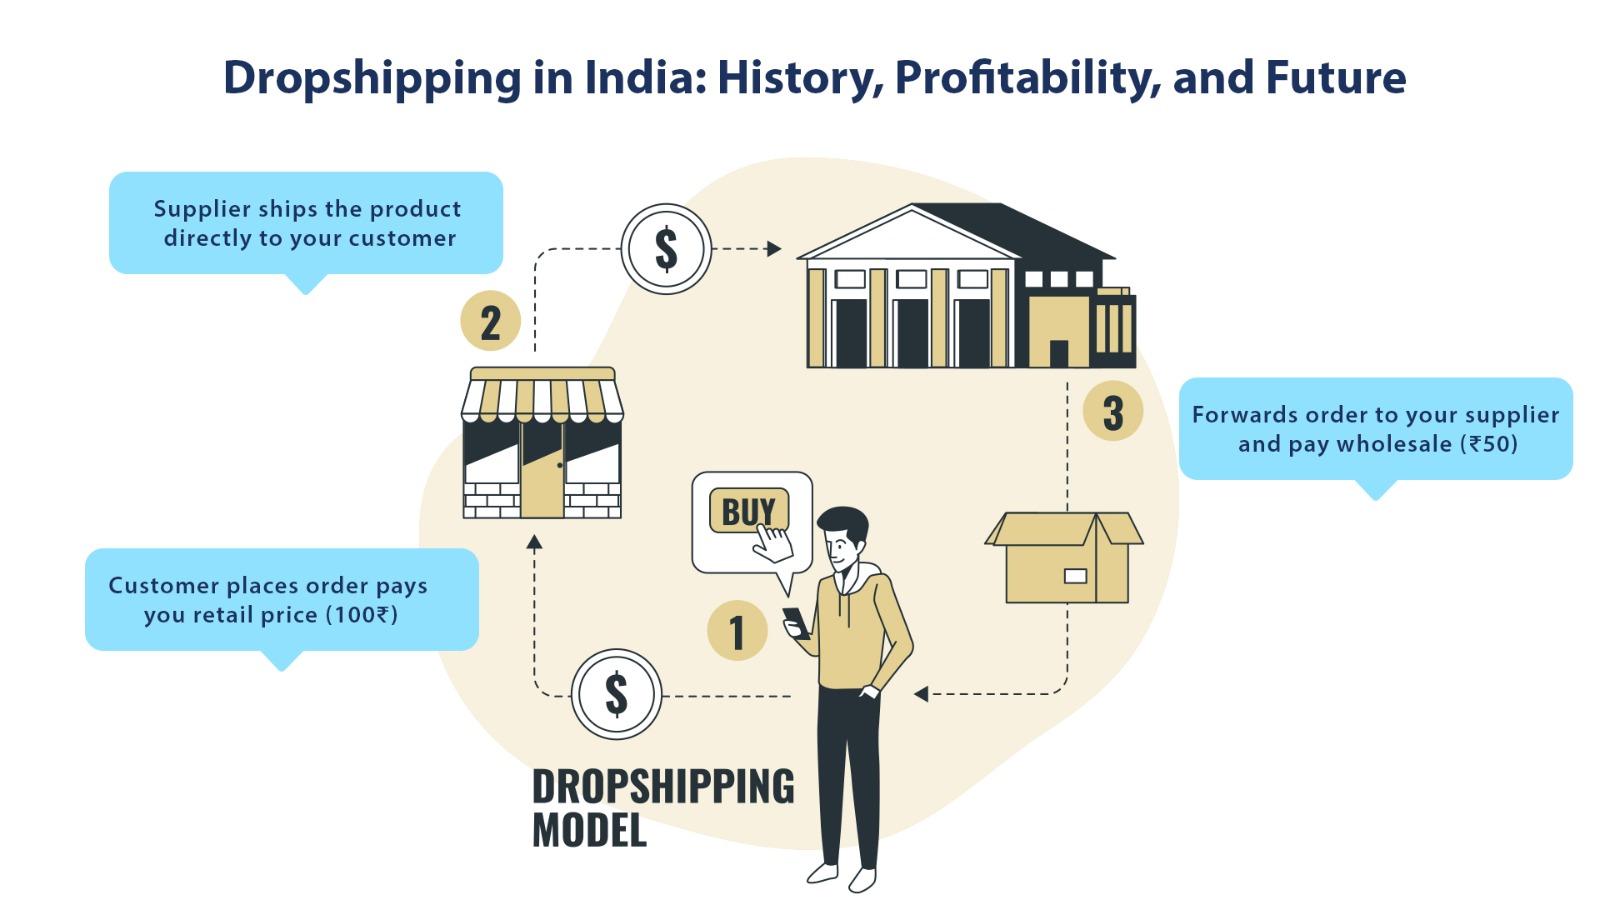 Dropshipping in India: History, Profitability, and Future